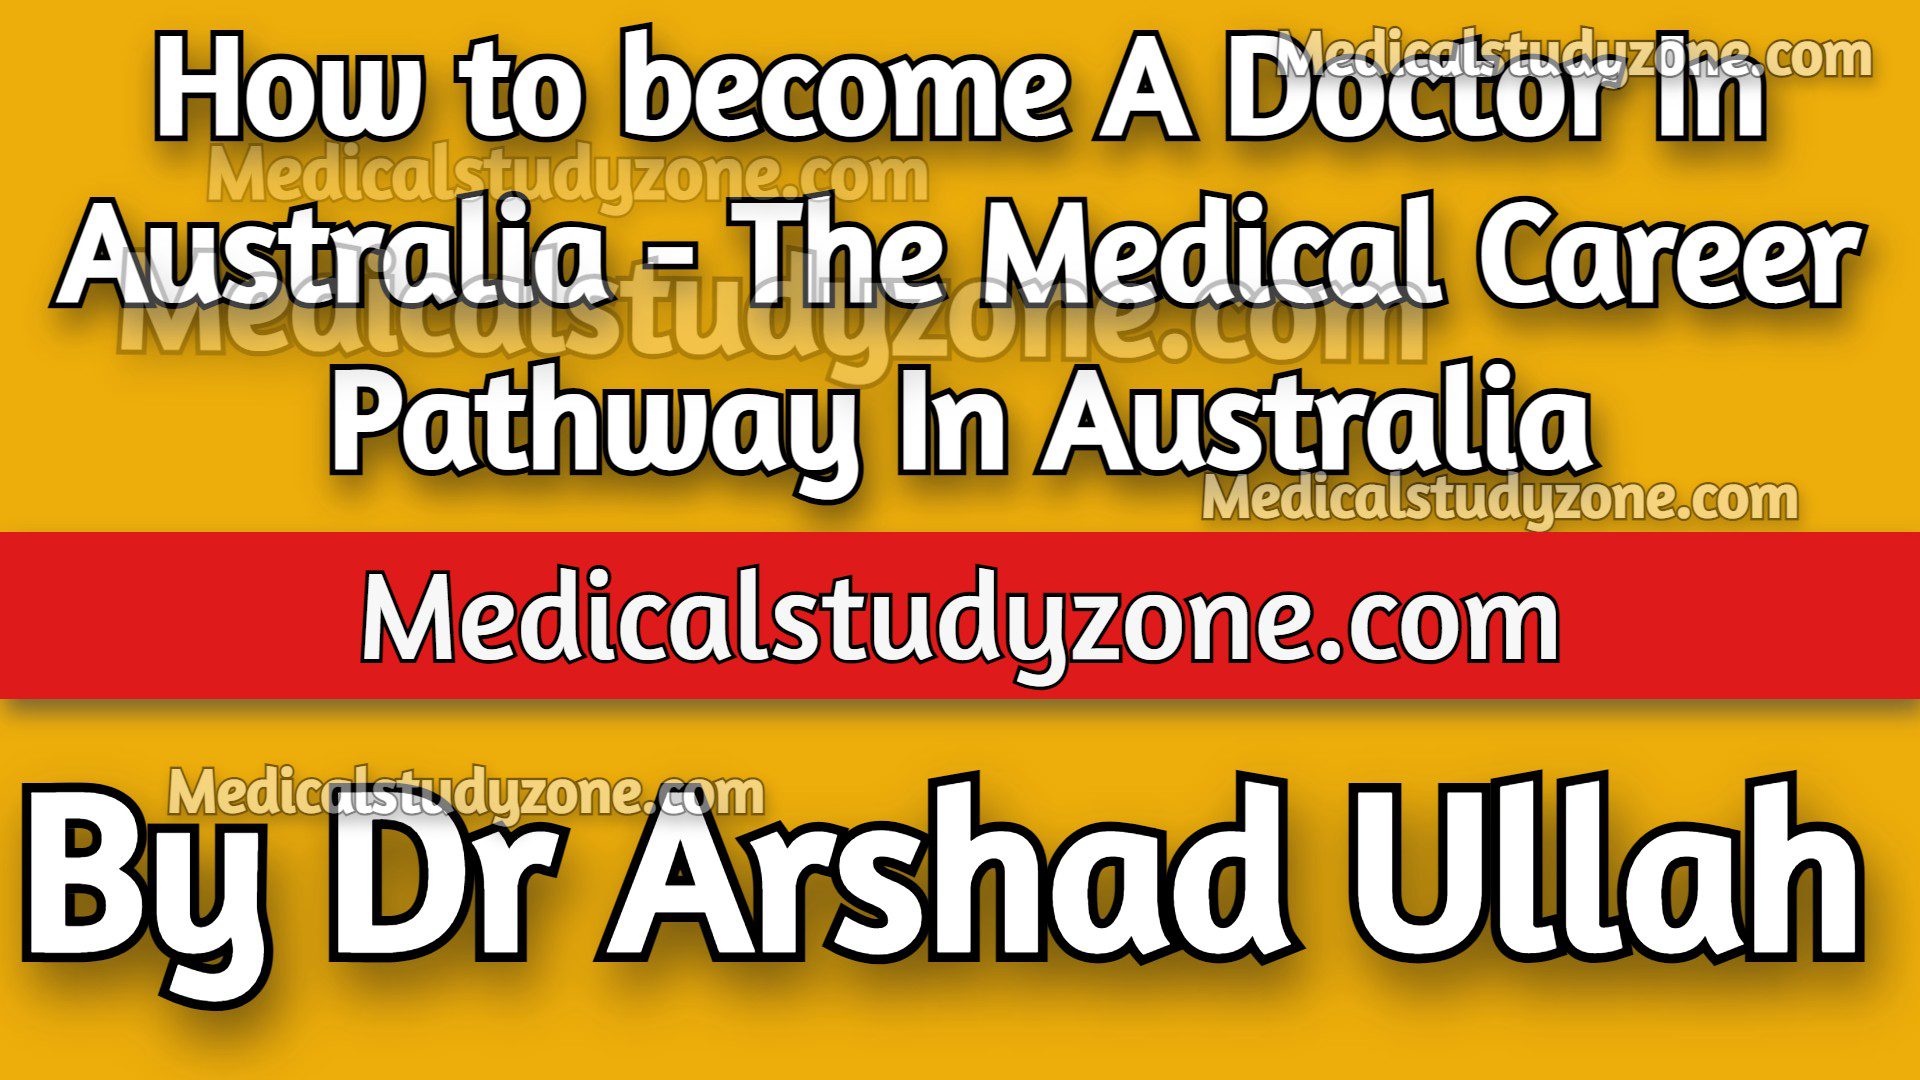 How to become A Doctor In Australia 2023 - The Medical Career Pathway In Australia